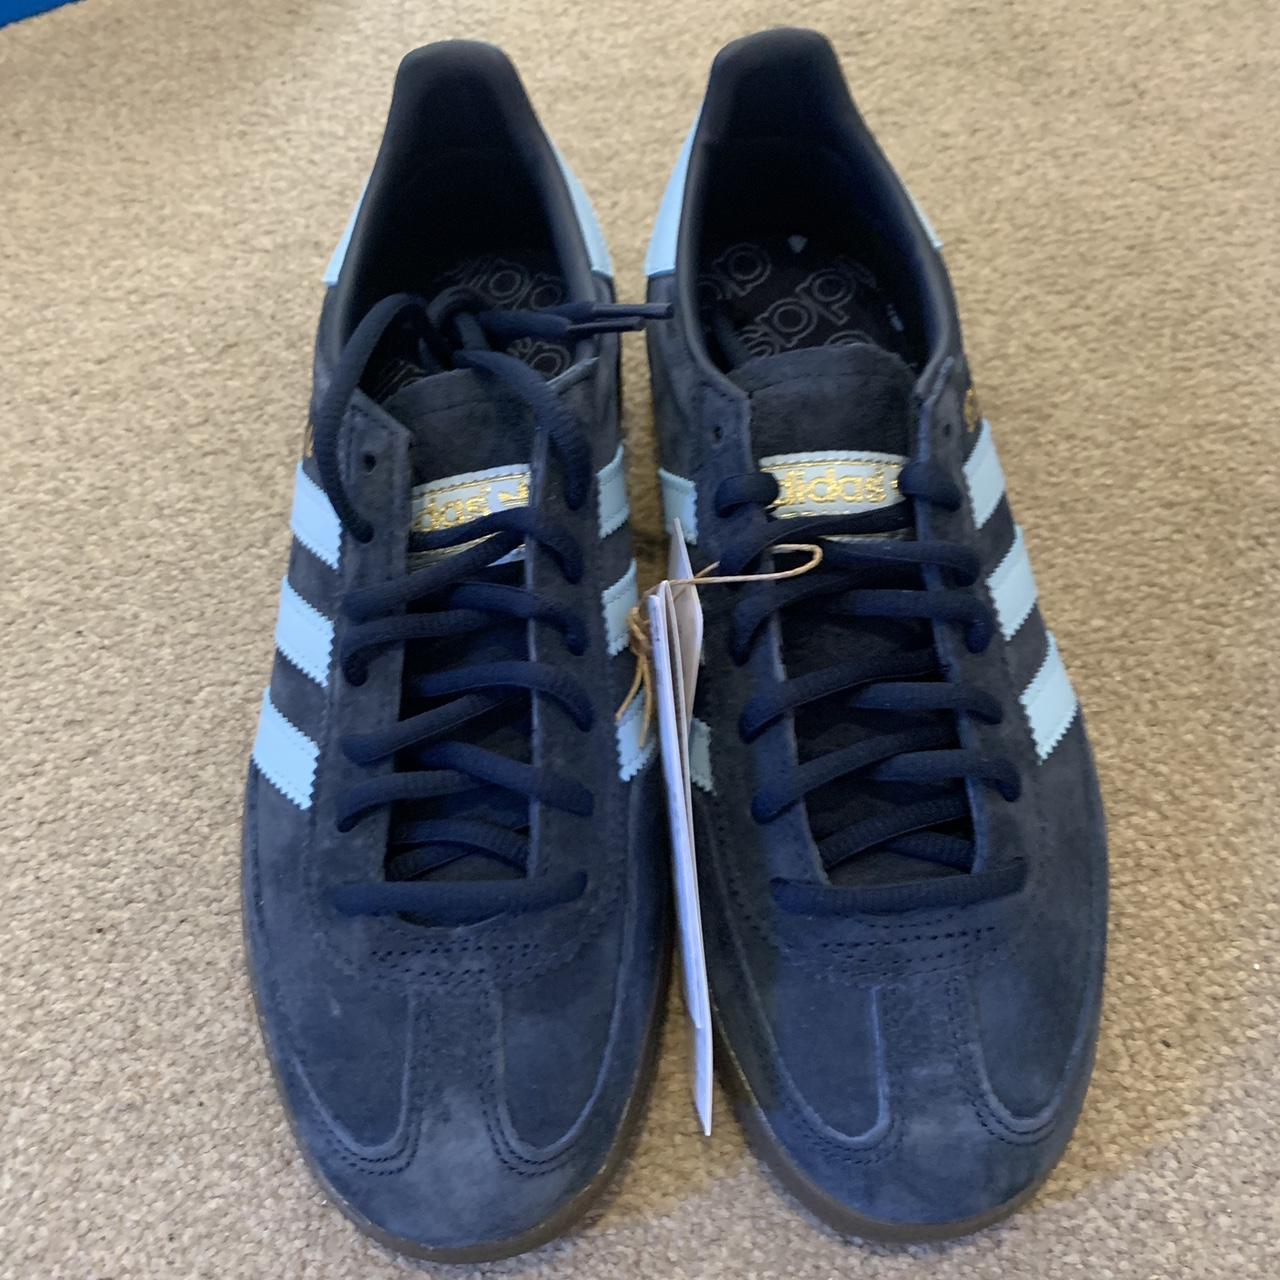 Adidas Women's Navy and Blue Trainers | Depop